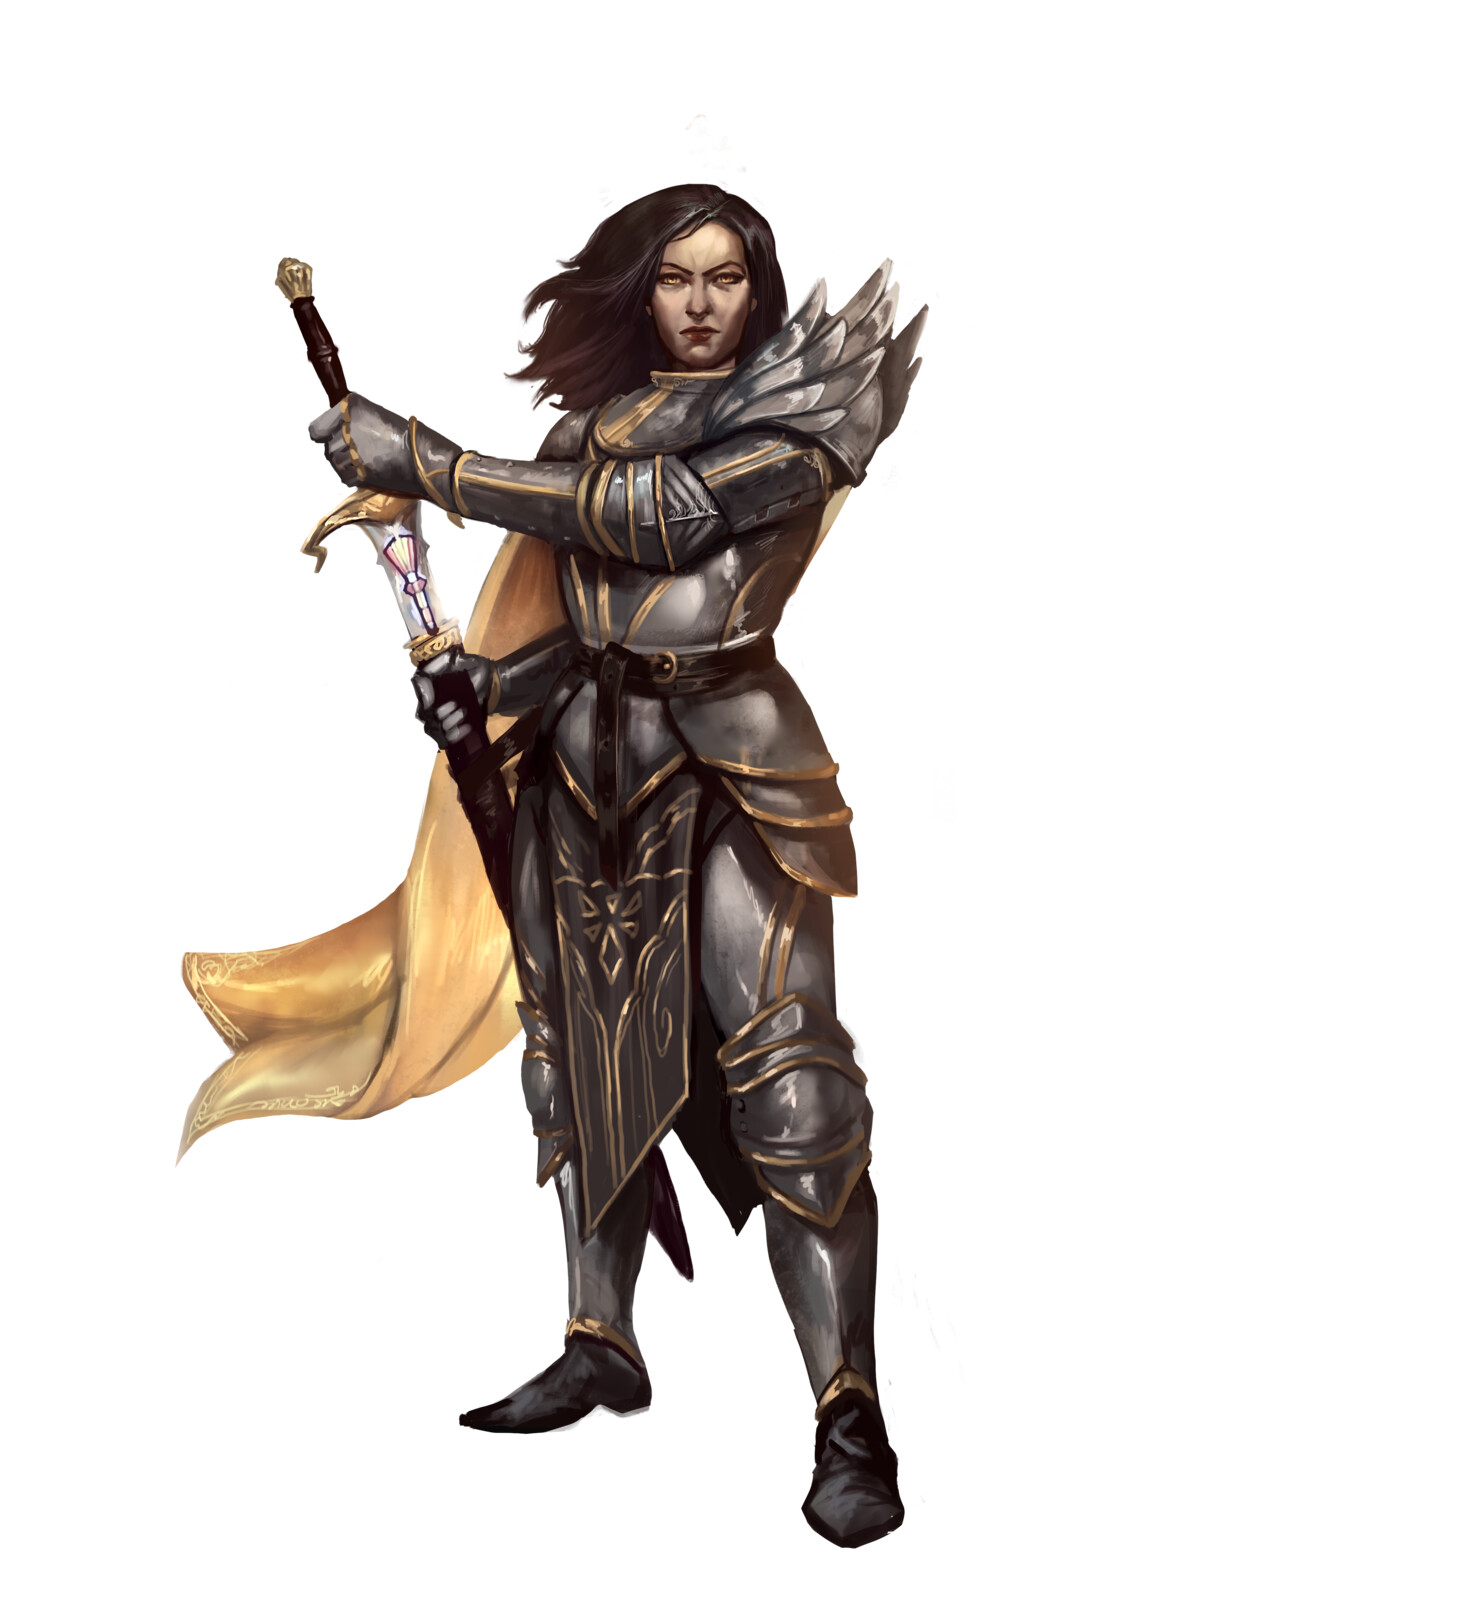 Eugenio Frosali - Aasimar Cleric Commission